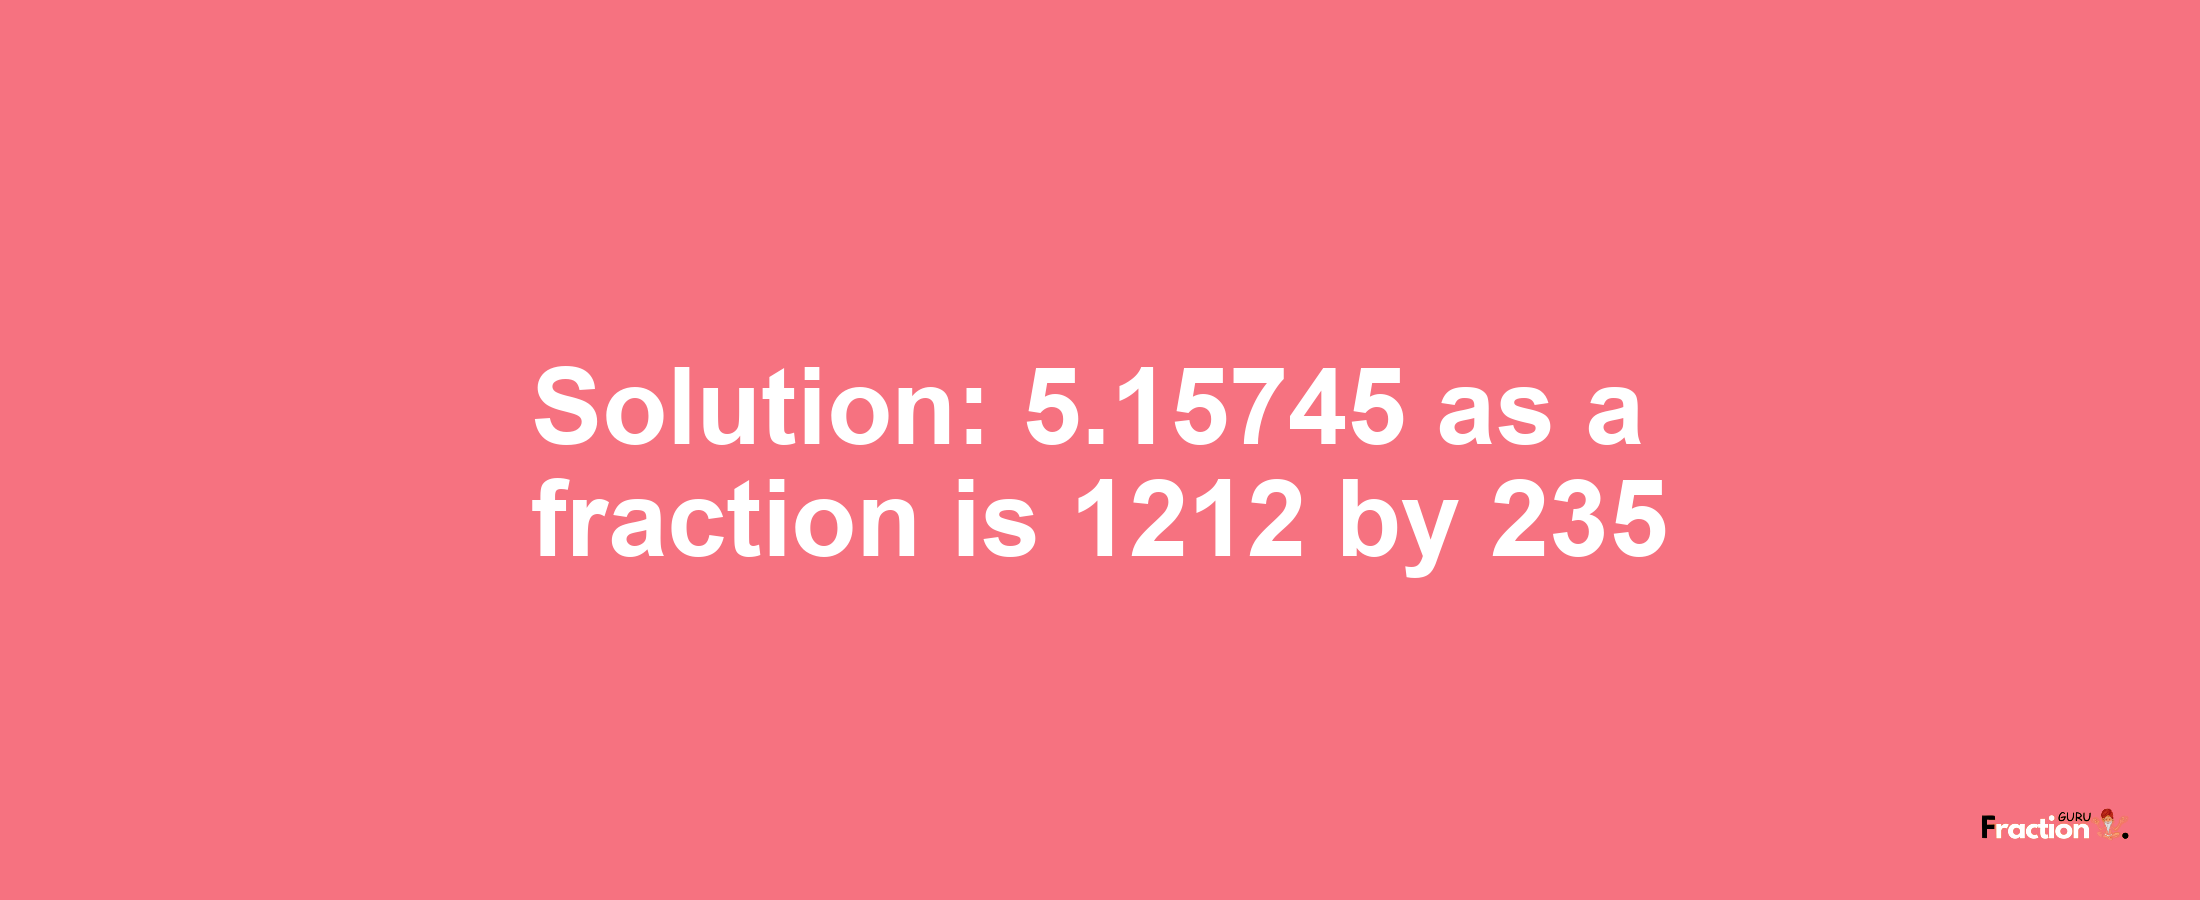 Solution:5.15745 as a fraction is 1212/235